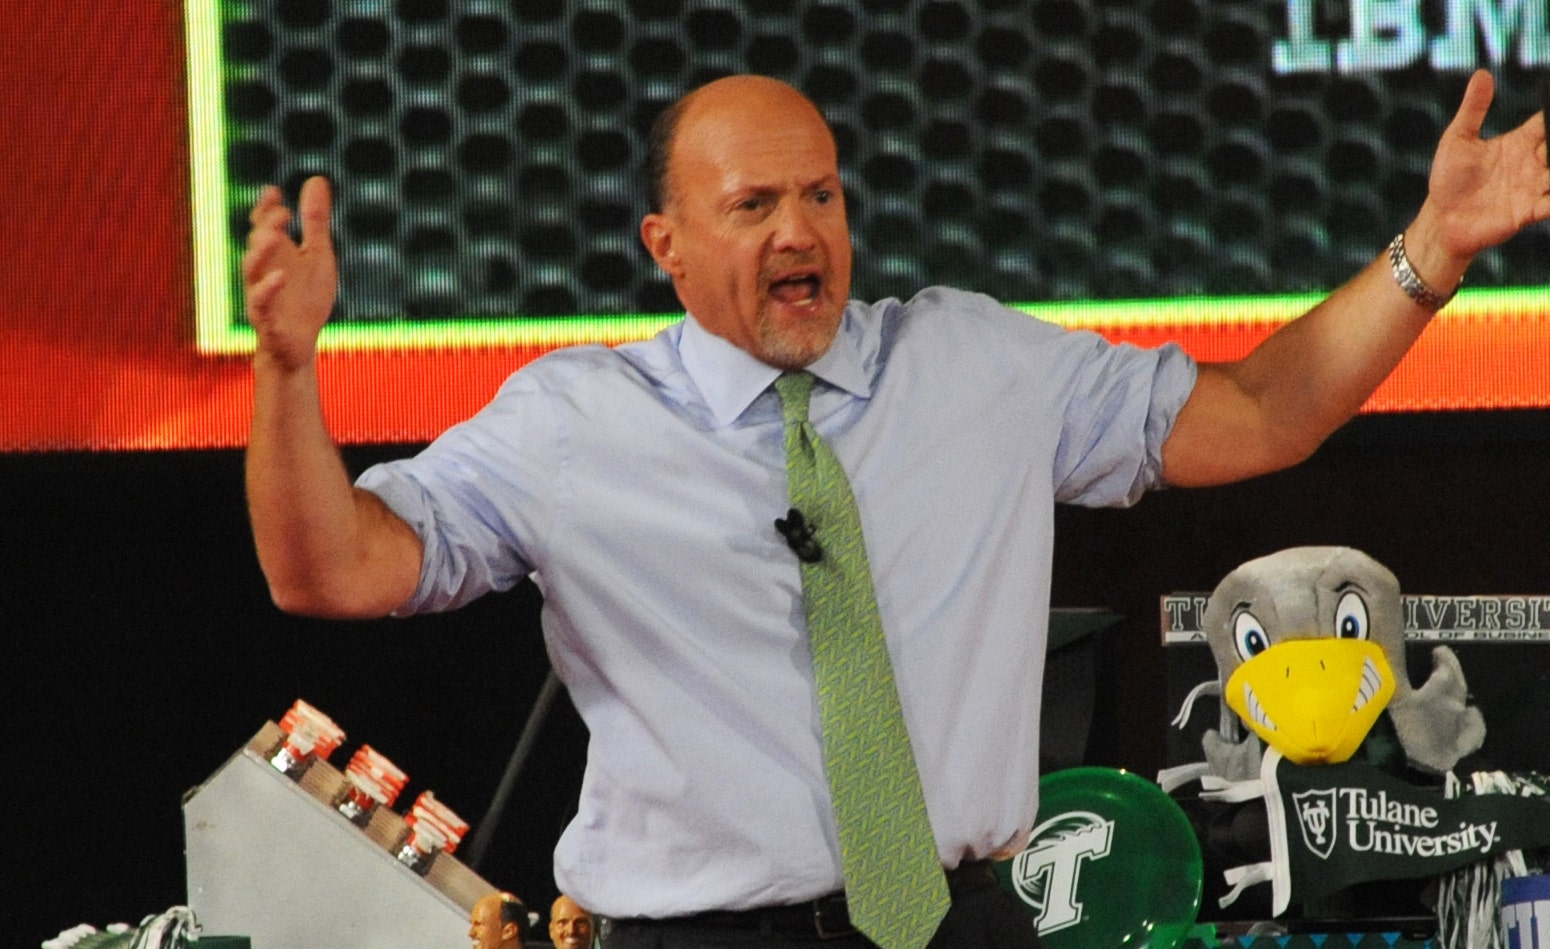 Jim Cramer Urges Investors Not To Dump Traditional, Reliable Stocks: 'It Is So Easy To Panic...'